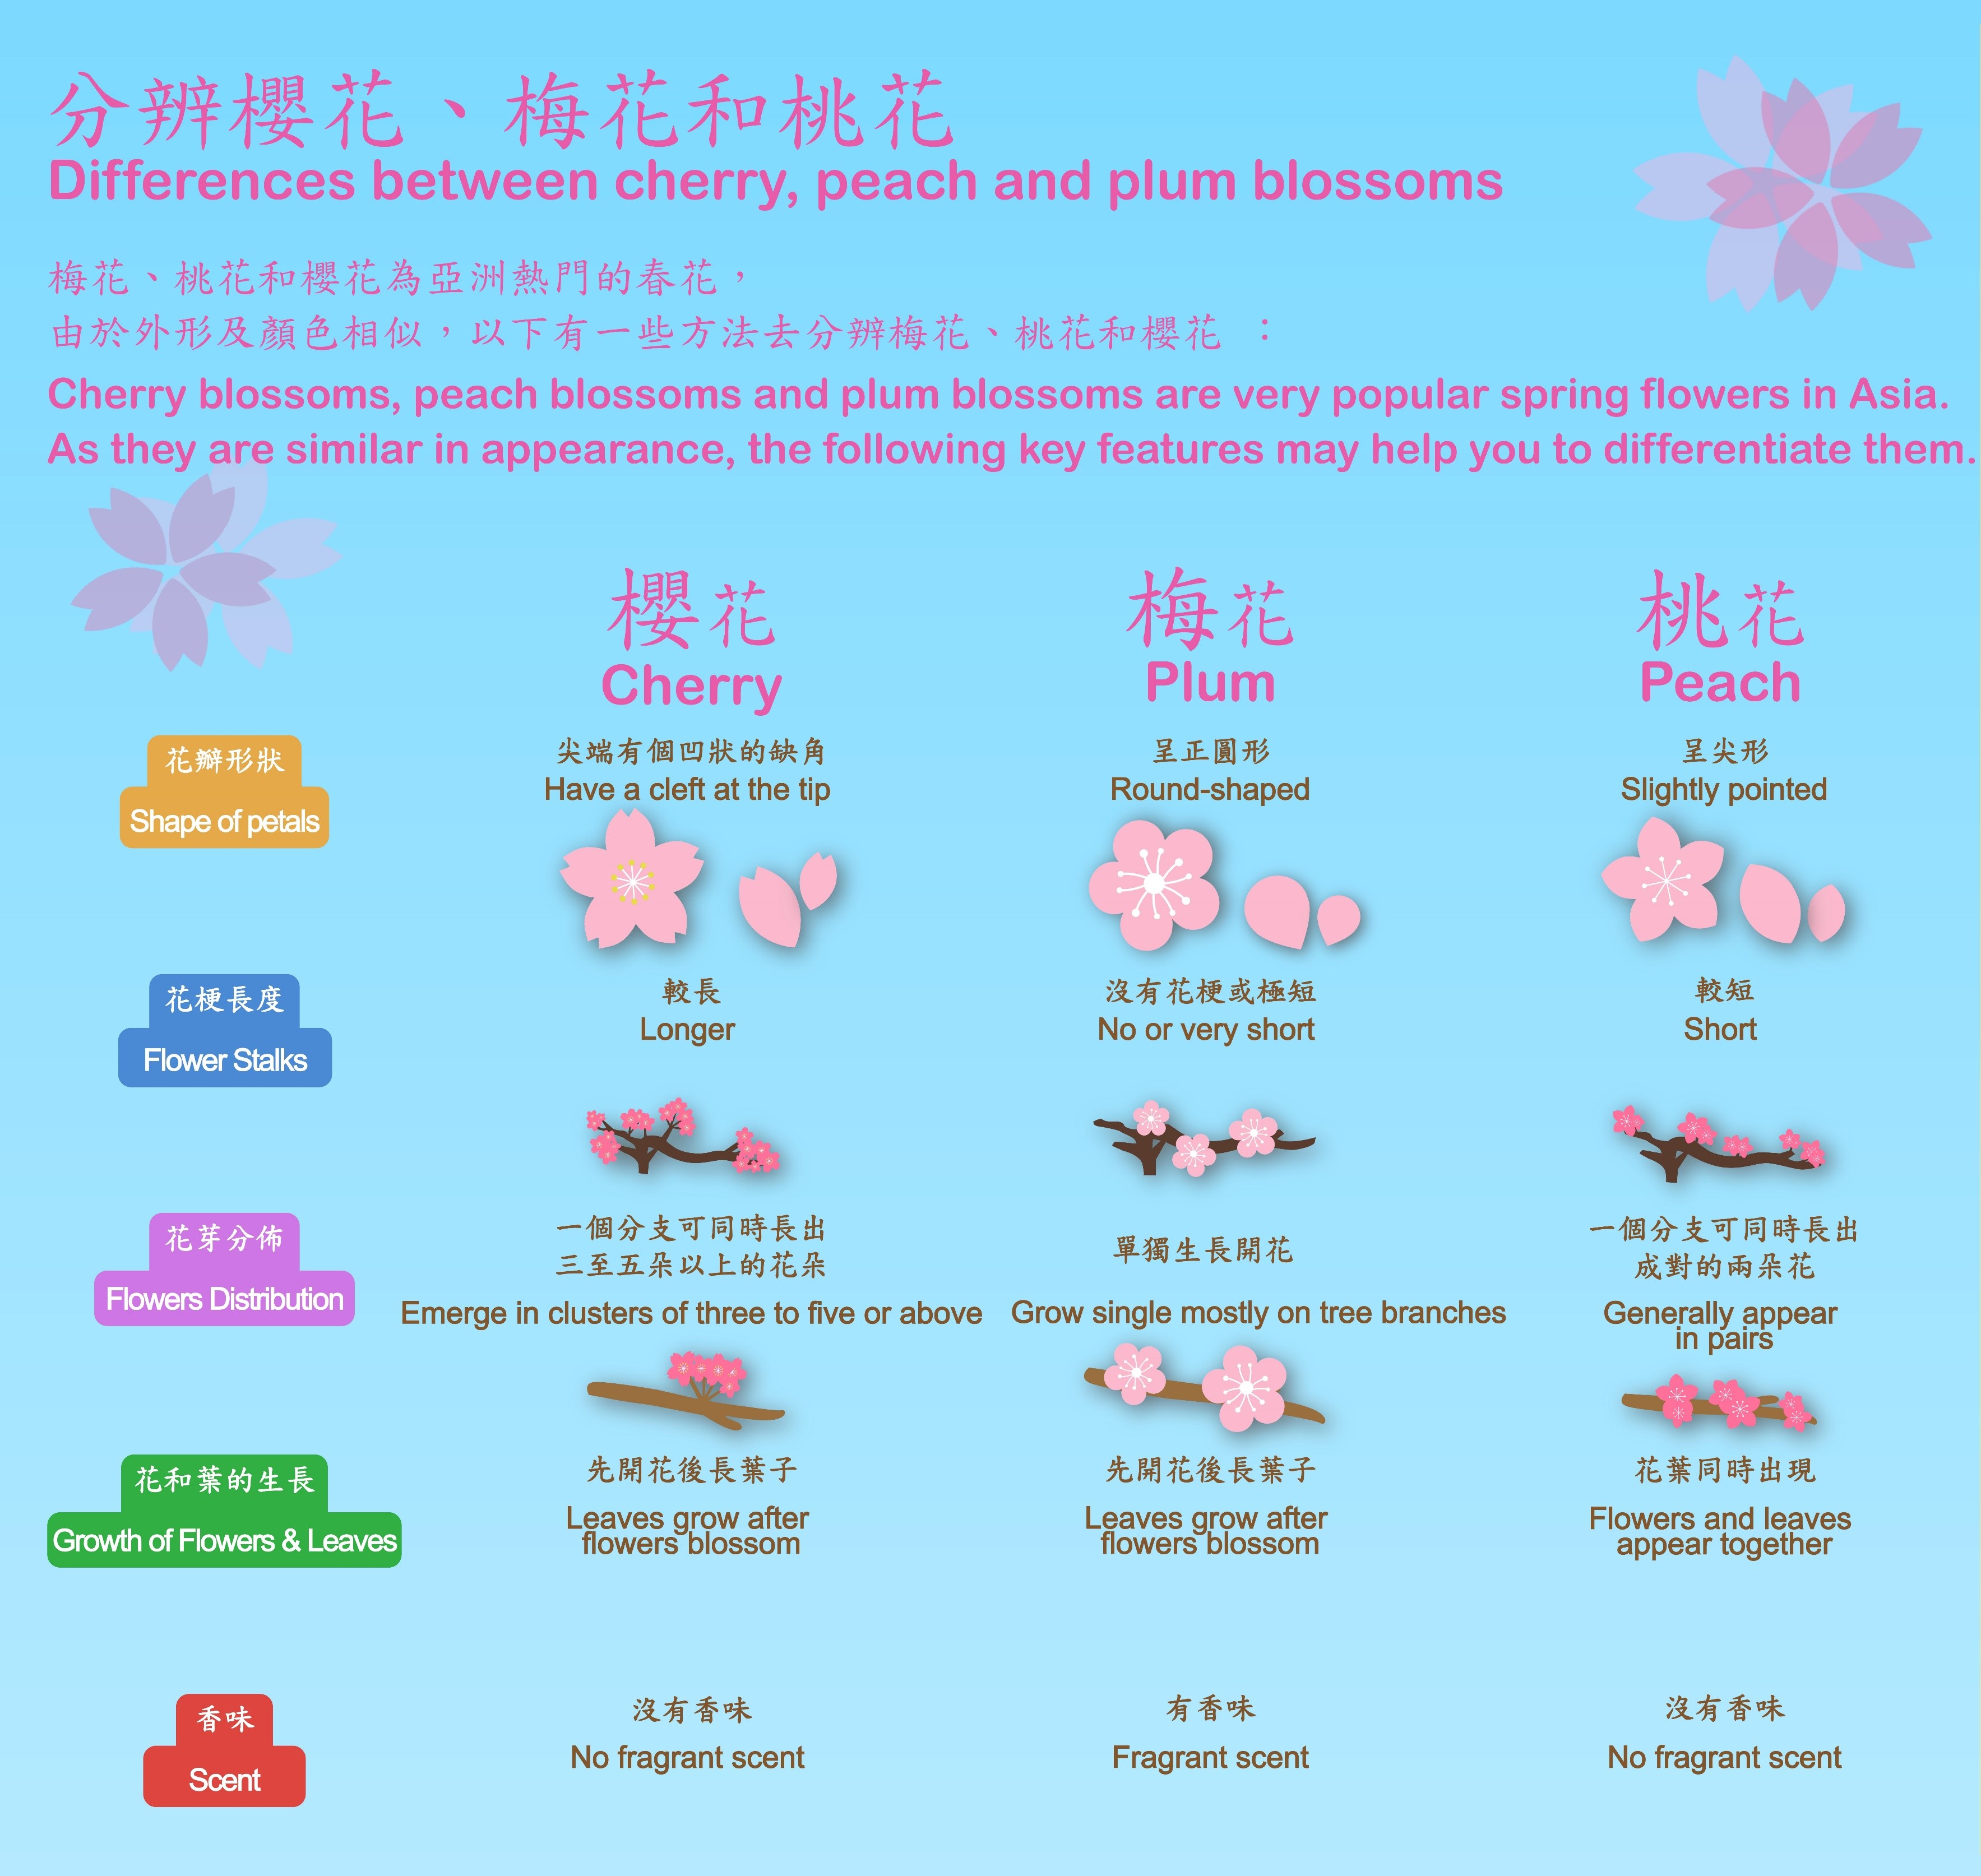 Differences between cherry, peach and plum blossoms